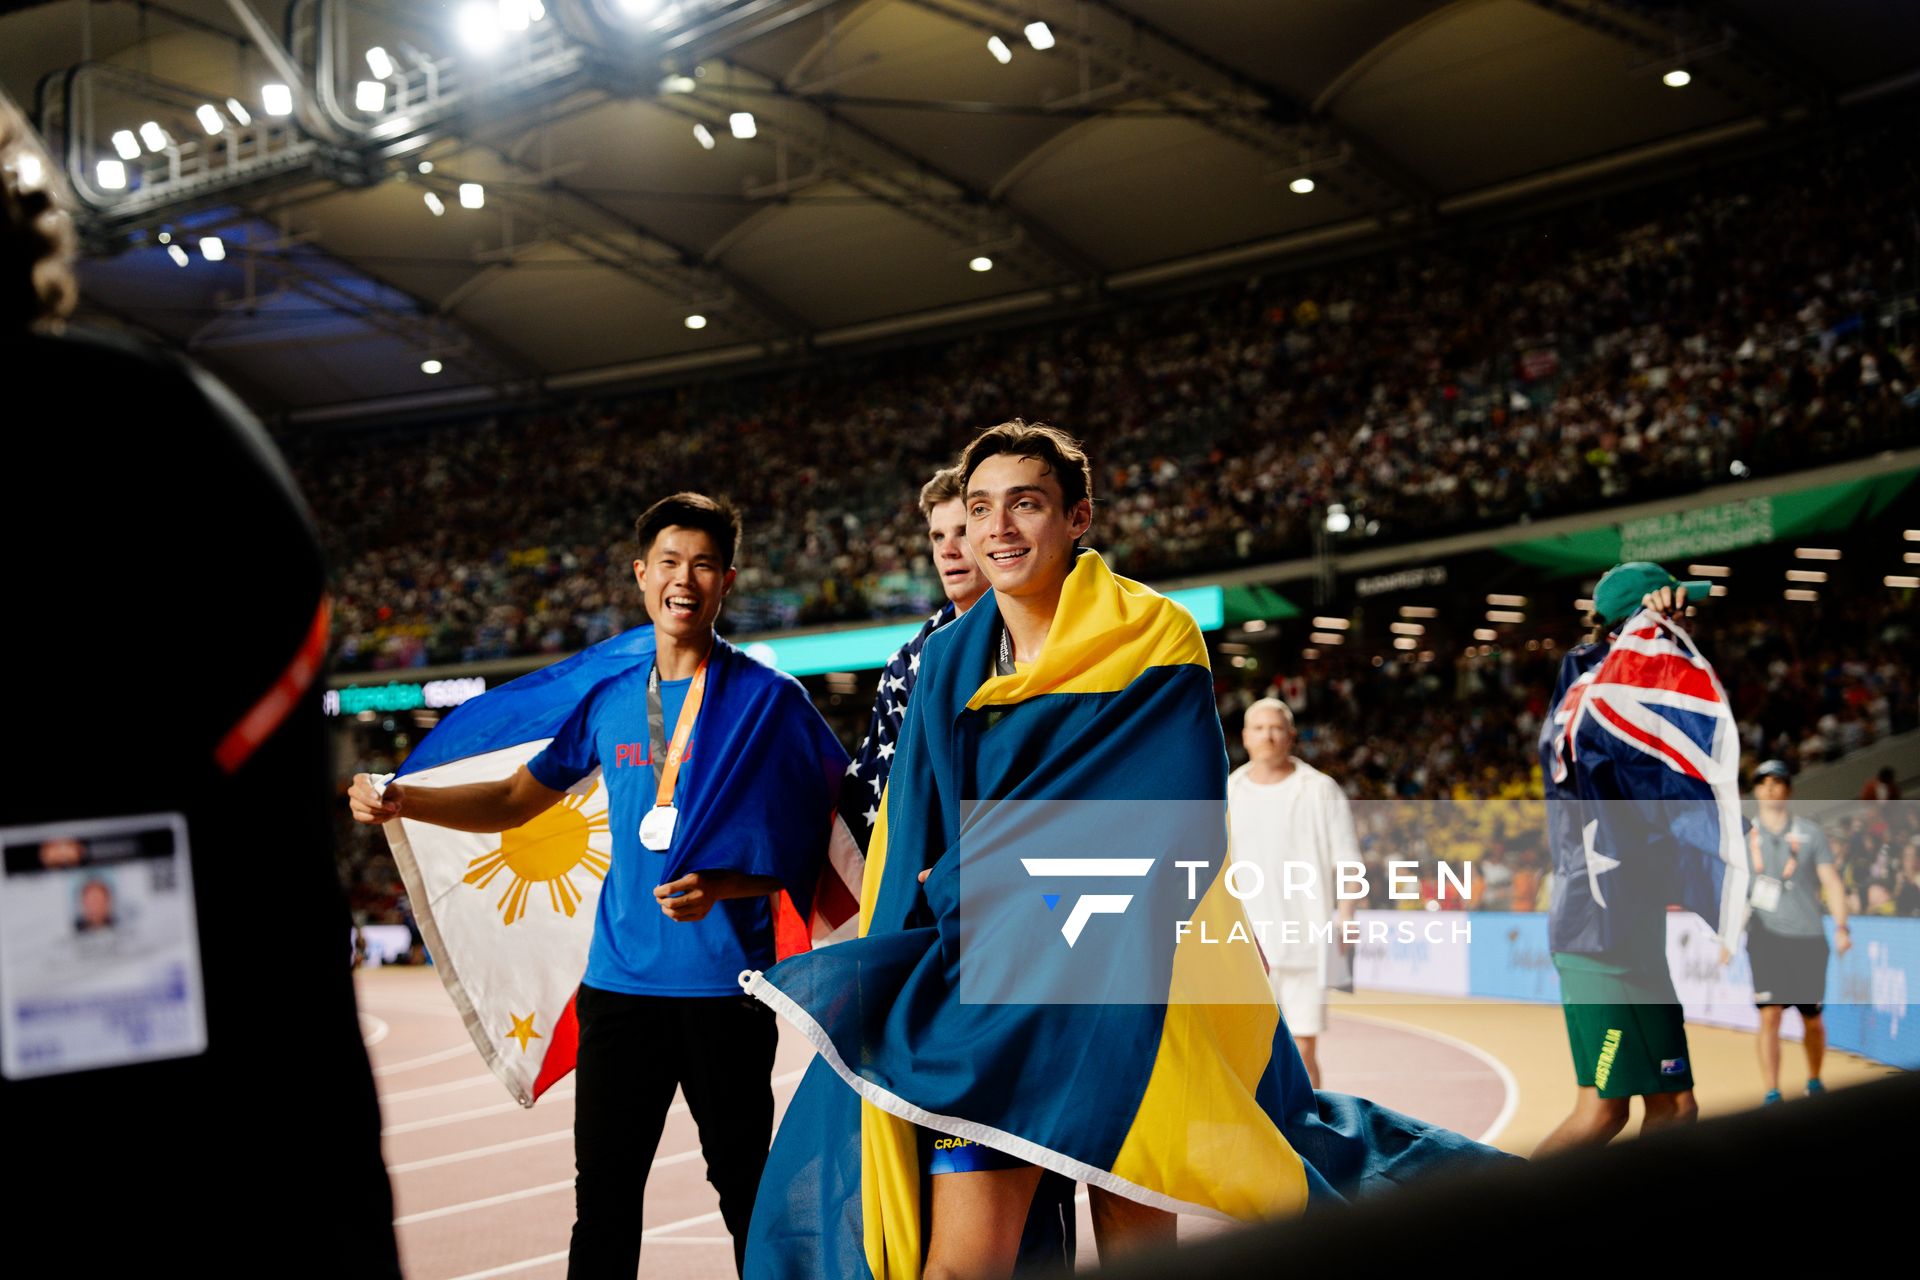 Ernest John Obiena (PHI/Philippines), Armand Duplantis (SWE/Sweden) during the Pole Vault on Day 8 of the World Athletics Championships Budapest 23 at the National Athletics Centre in Budapest, Hungary on August 26, 2023.